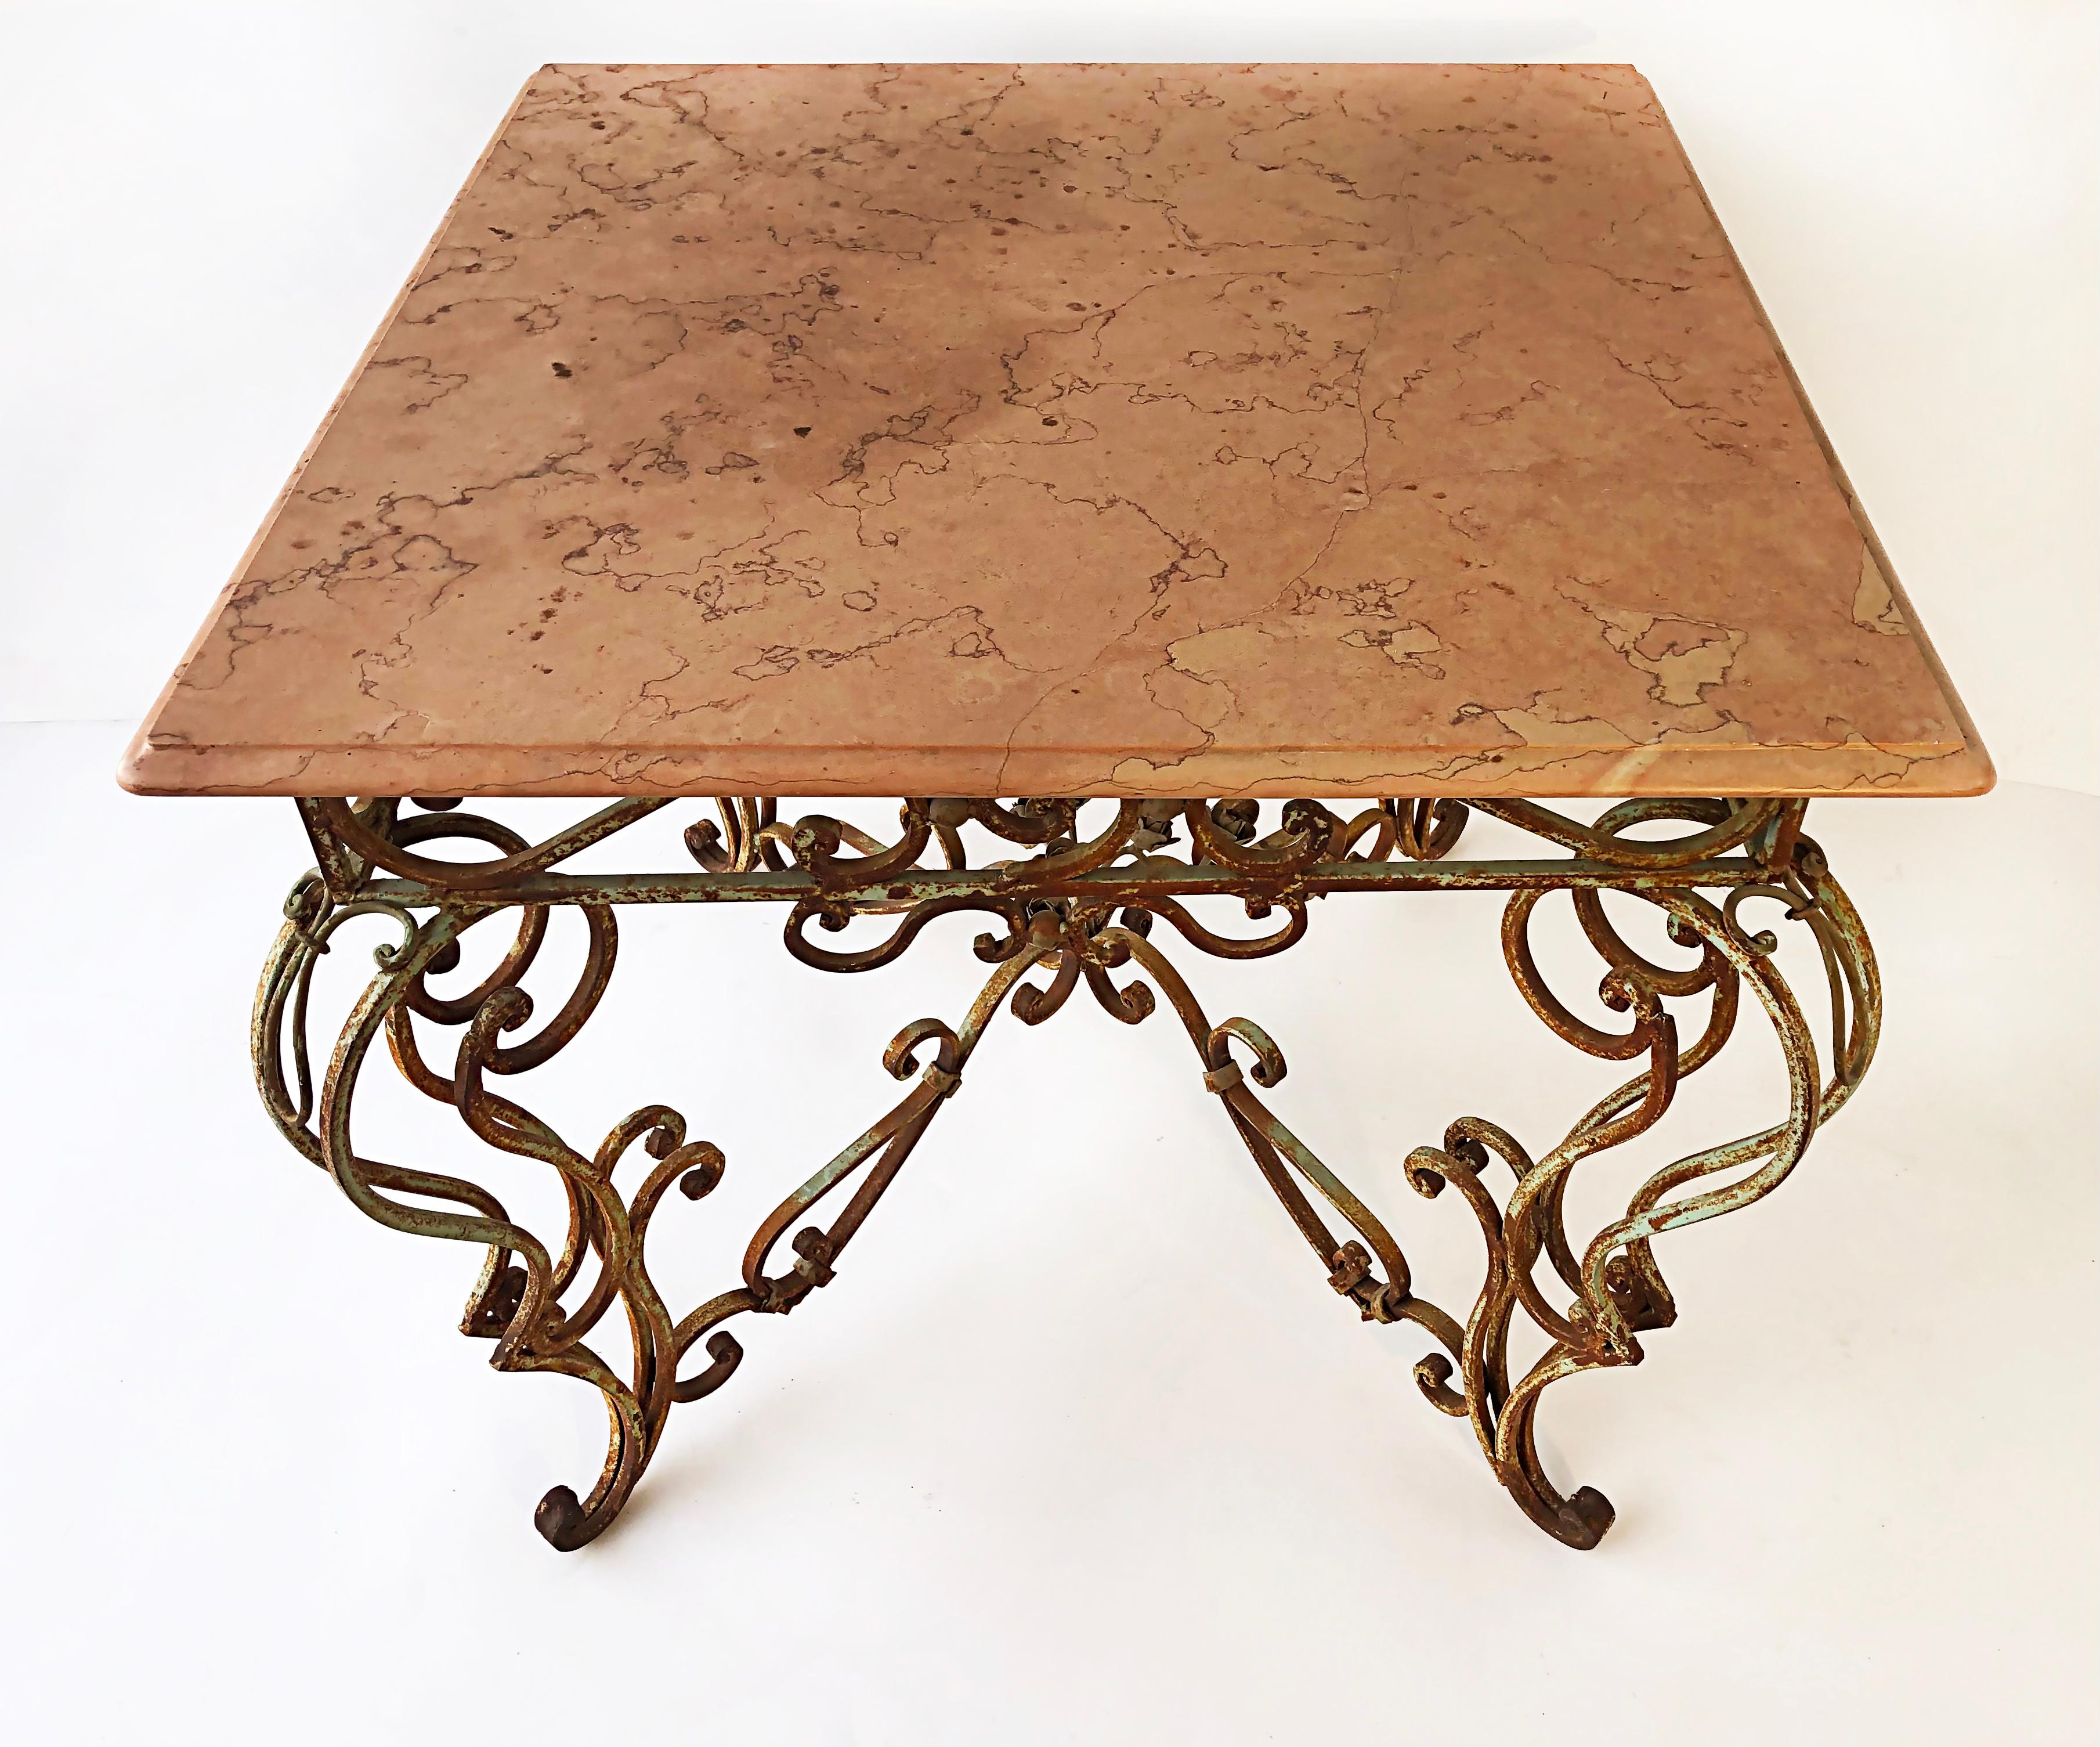 Vintage wrought iron marble top garden table with scrollwork

Offered for sale is a substantial and elegant vintage wrought iron garden table with a marble top. The marble top rests upon a scrolled and painted floral iron base. The paint has